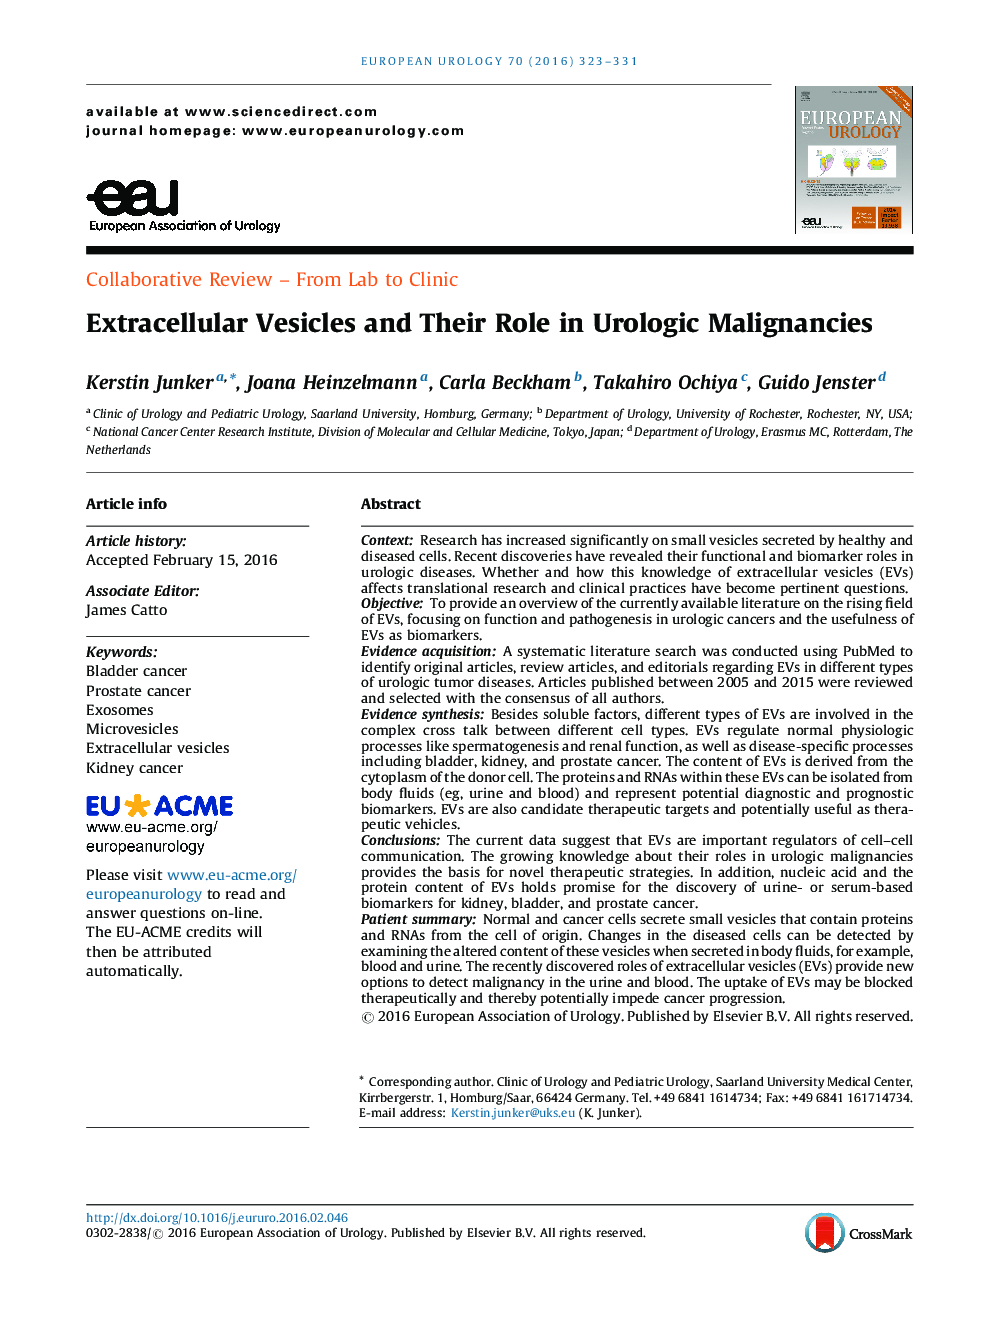 Extracellular Vesicles and Their Role in Urologic Malignancies